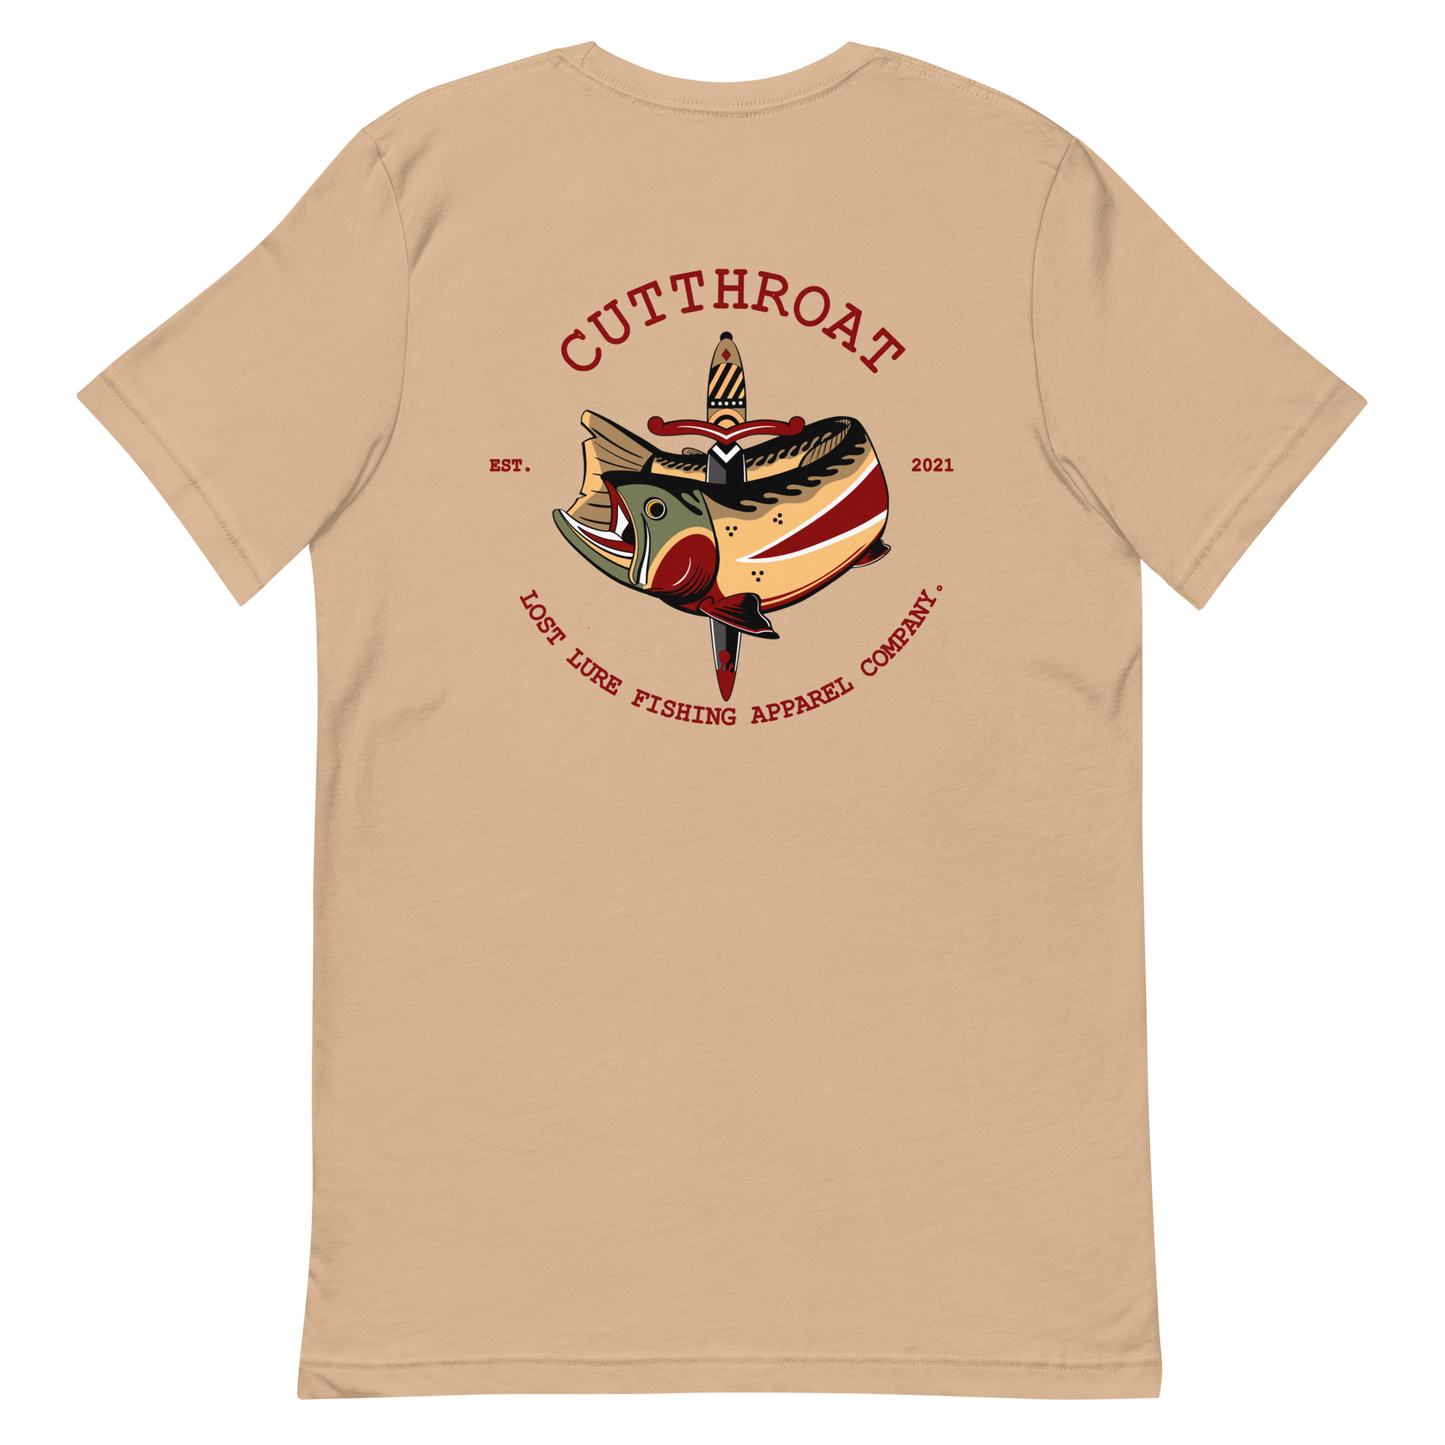 Cutthroat Trout fishing shirt. It’s an American traditional style design with a cutthroat trout and a dagger. The shirt reads Cutthroat trout, est. 2021, lost lure fishing apparel company. The front of the shirt has the lost lure logo. Light brown fishing shirt, back side 